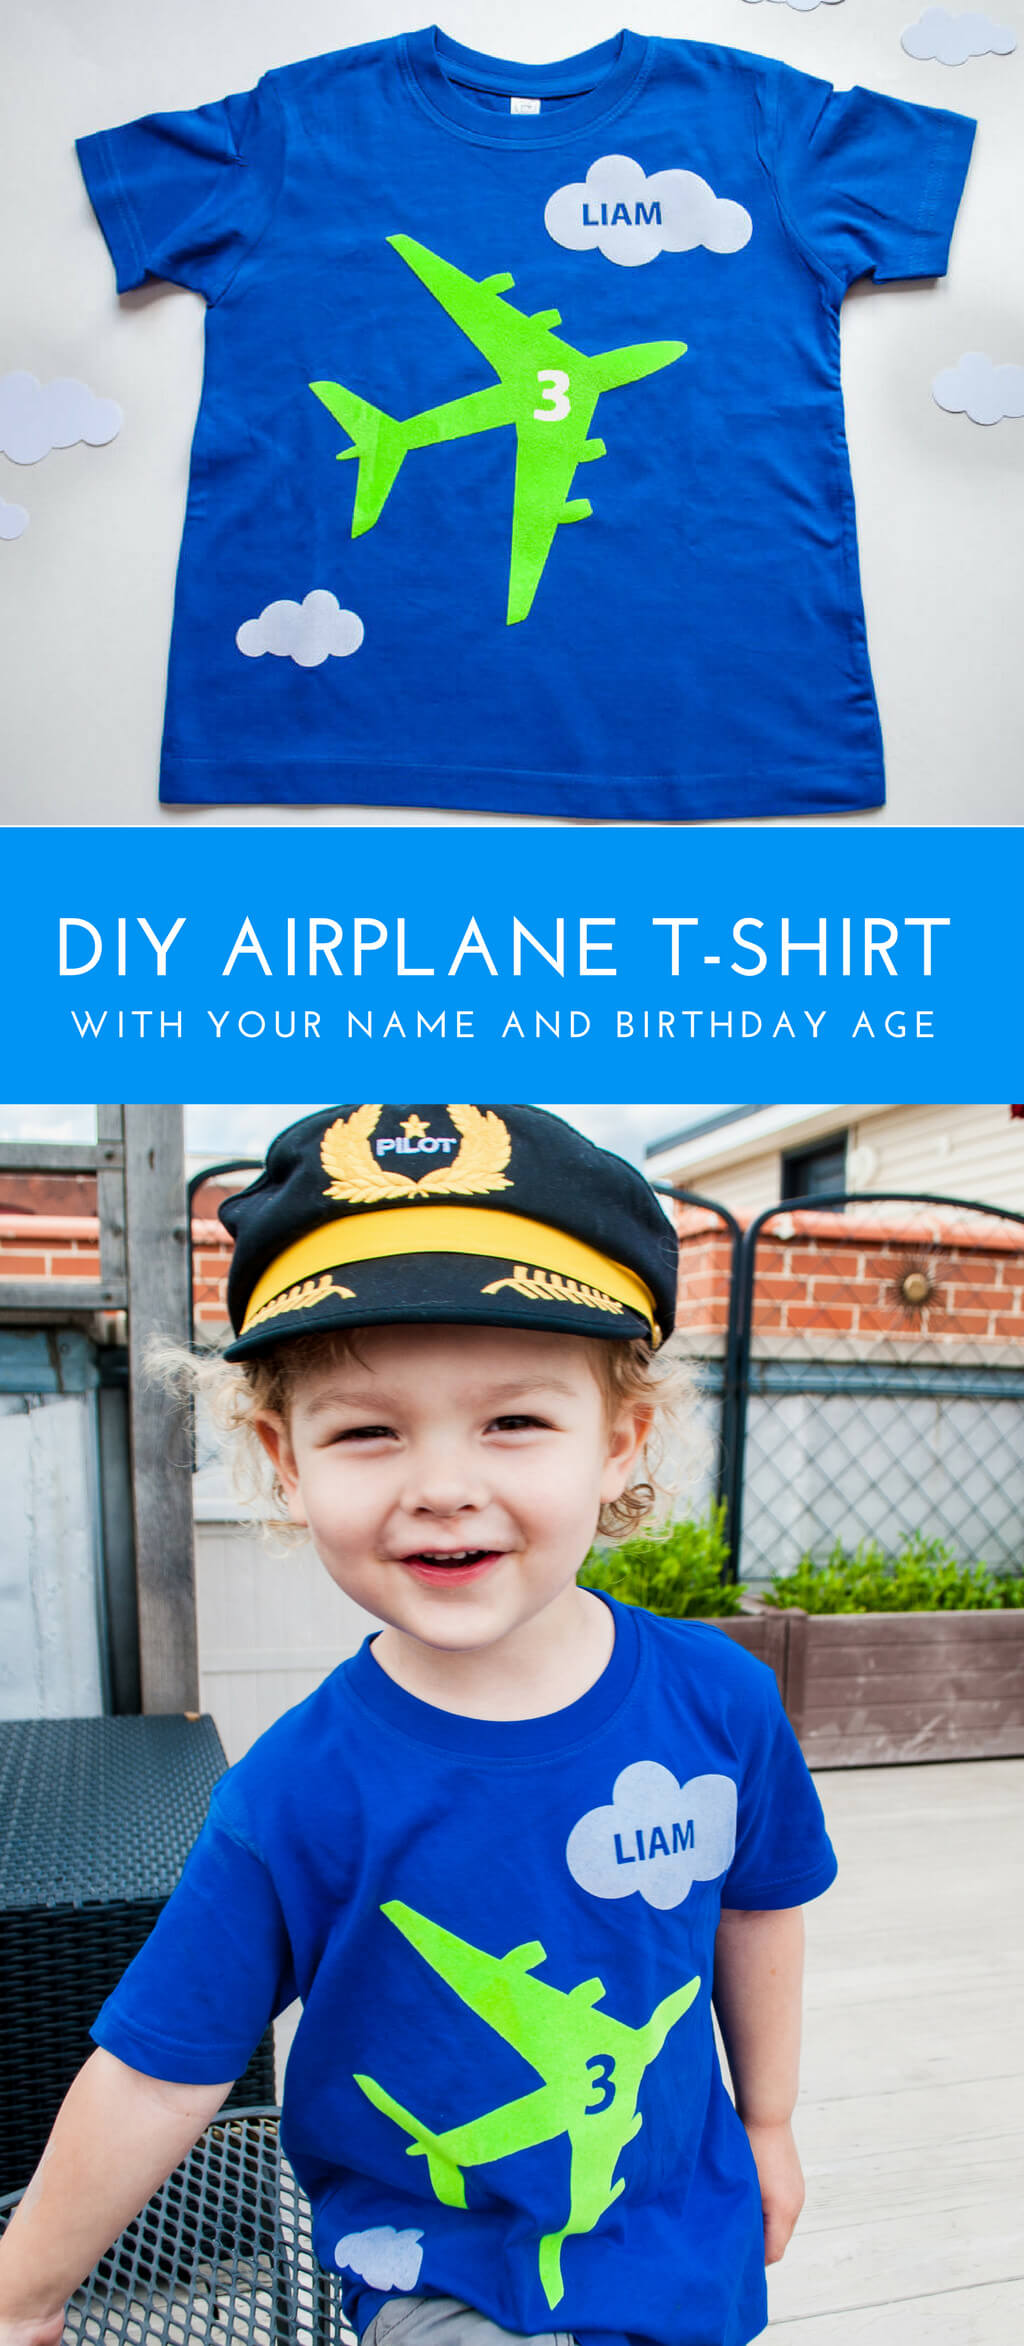 Kid's airplane birthday t-shirt personalized with name and age for an airplane birthday party